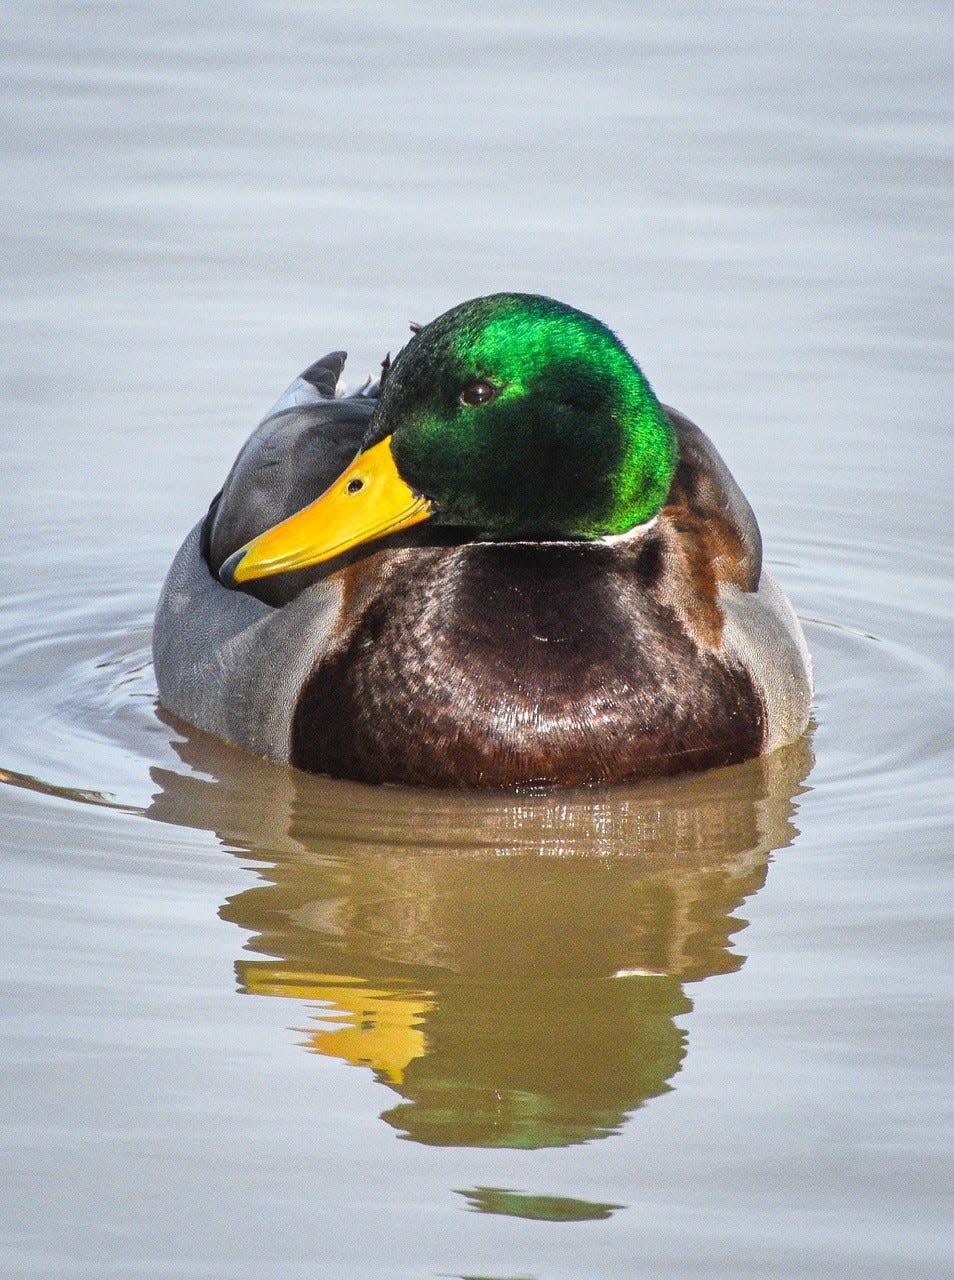 Birding can be fun and productive in winter in Ohio, where over 40 species of waterfowl can be found, including the this mallard who lives at Clyde Community Park.